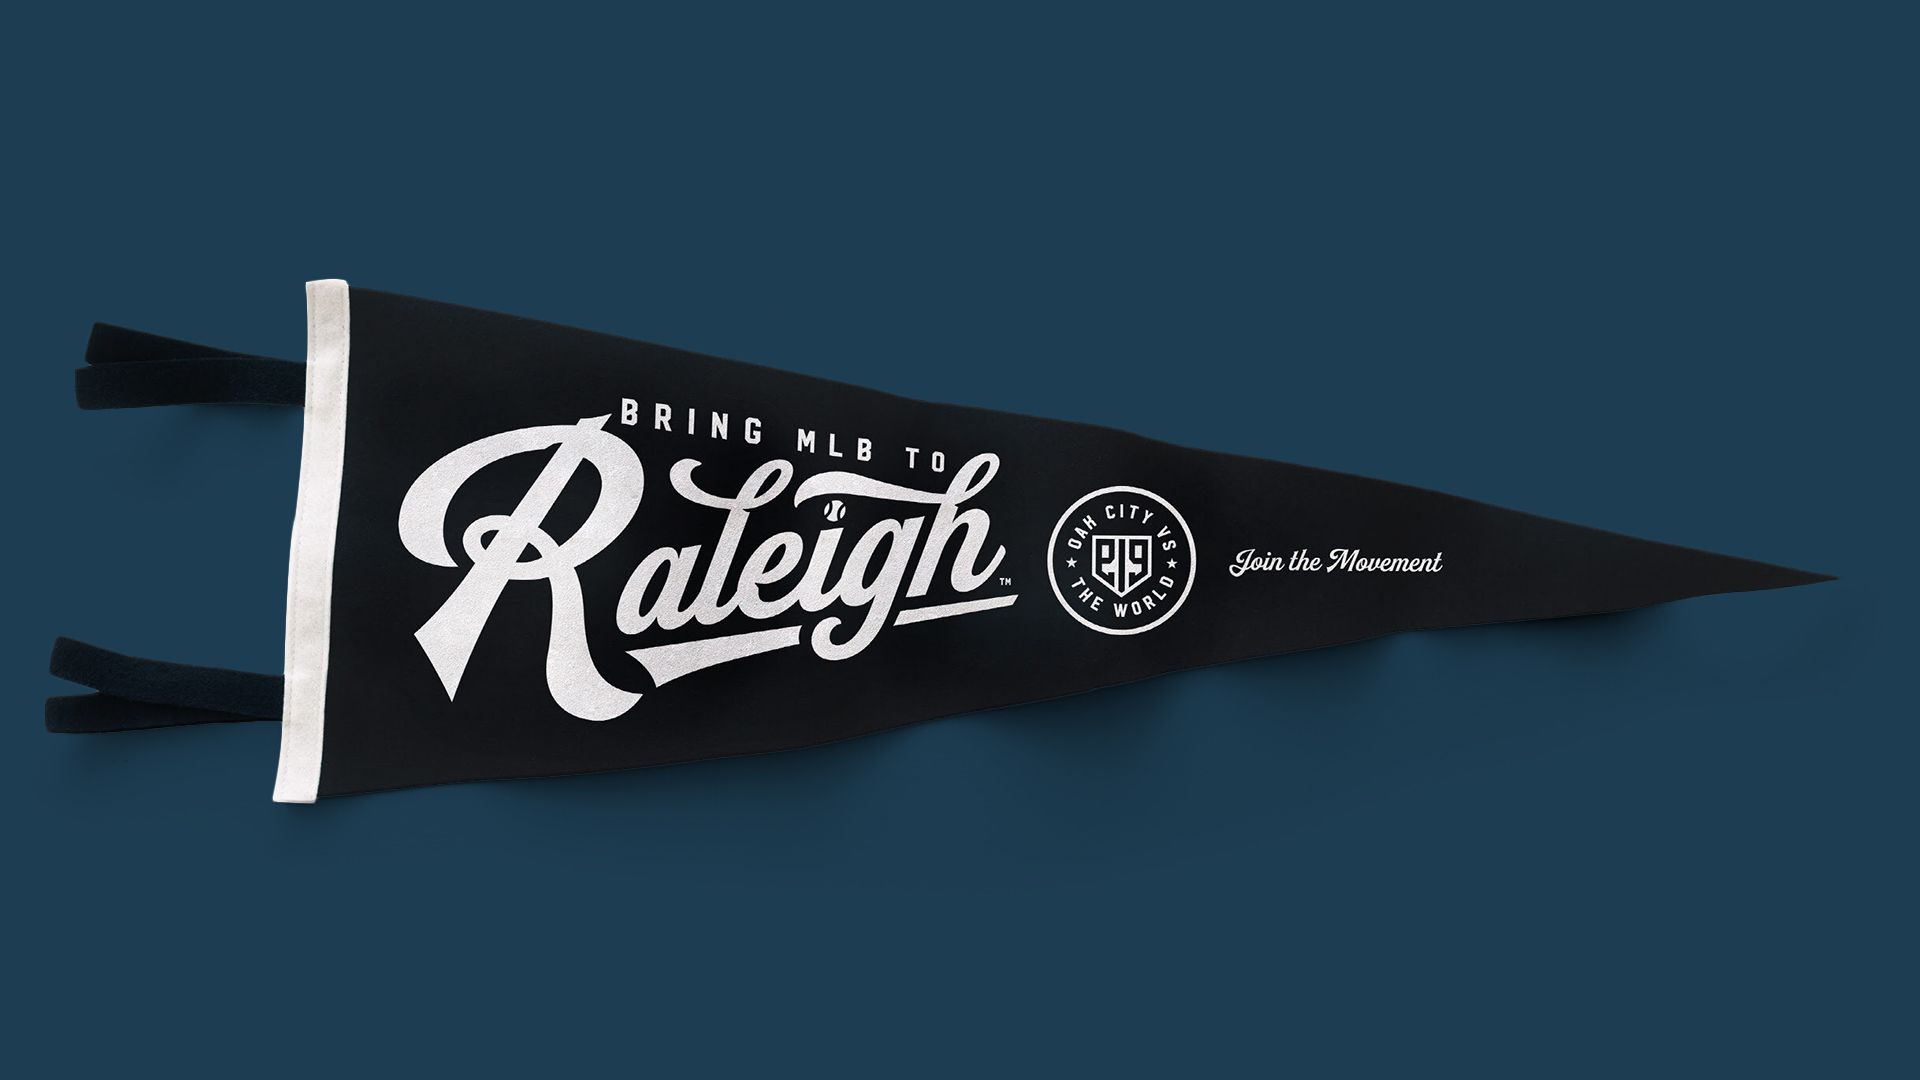 A pennant that says Bring MLB to Raleigh